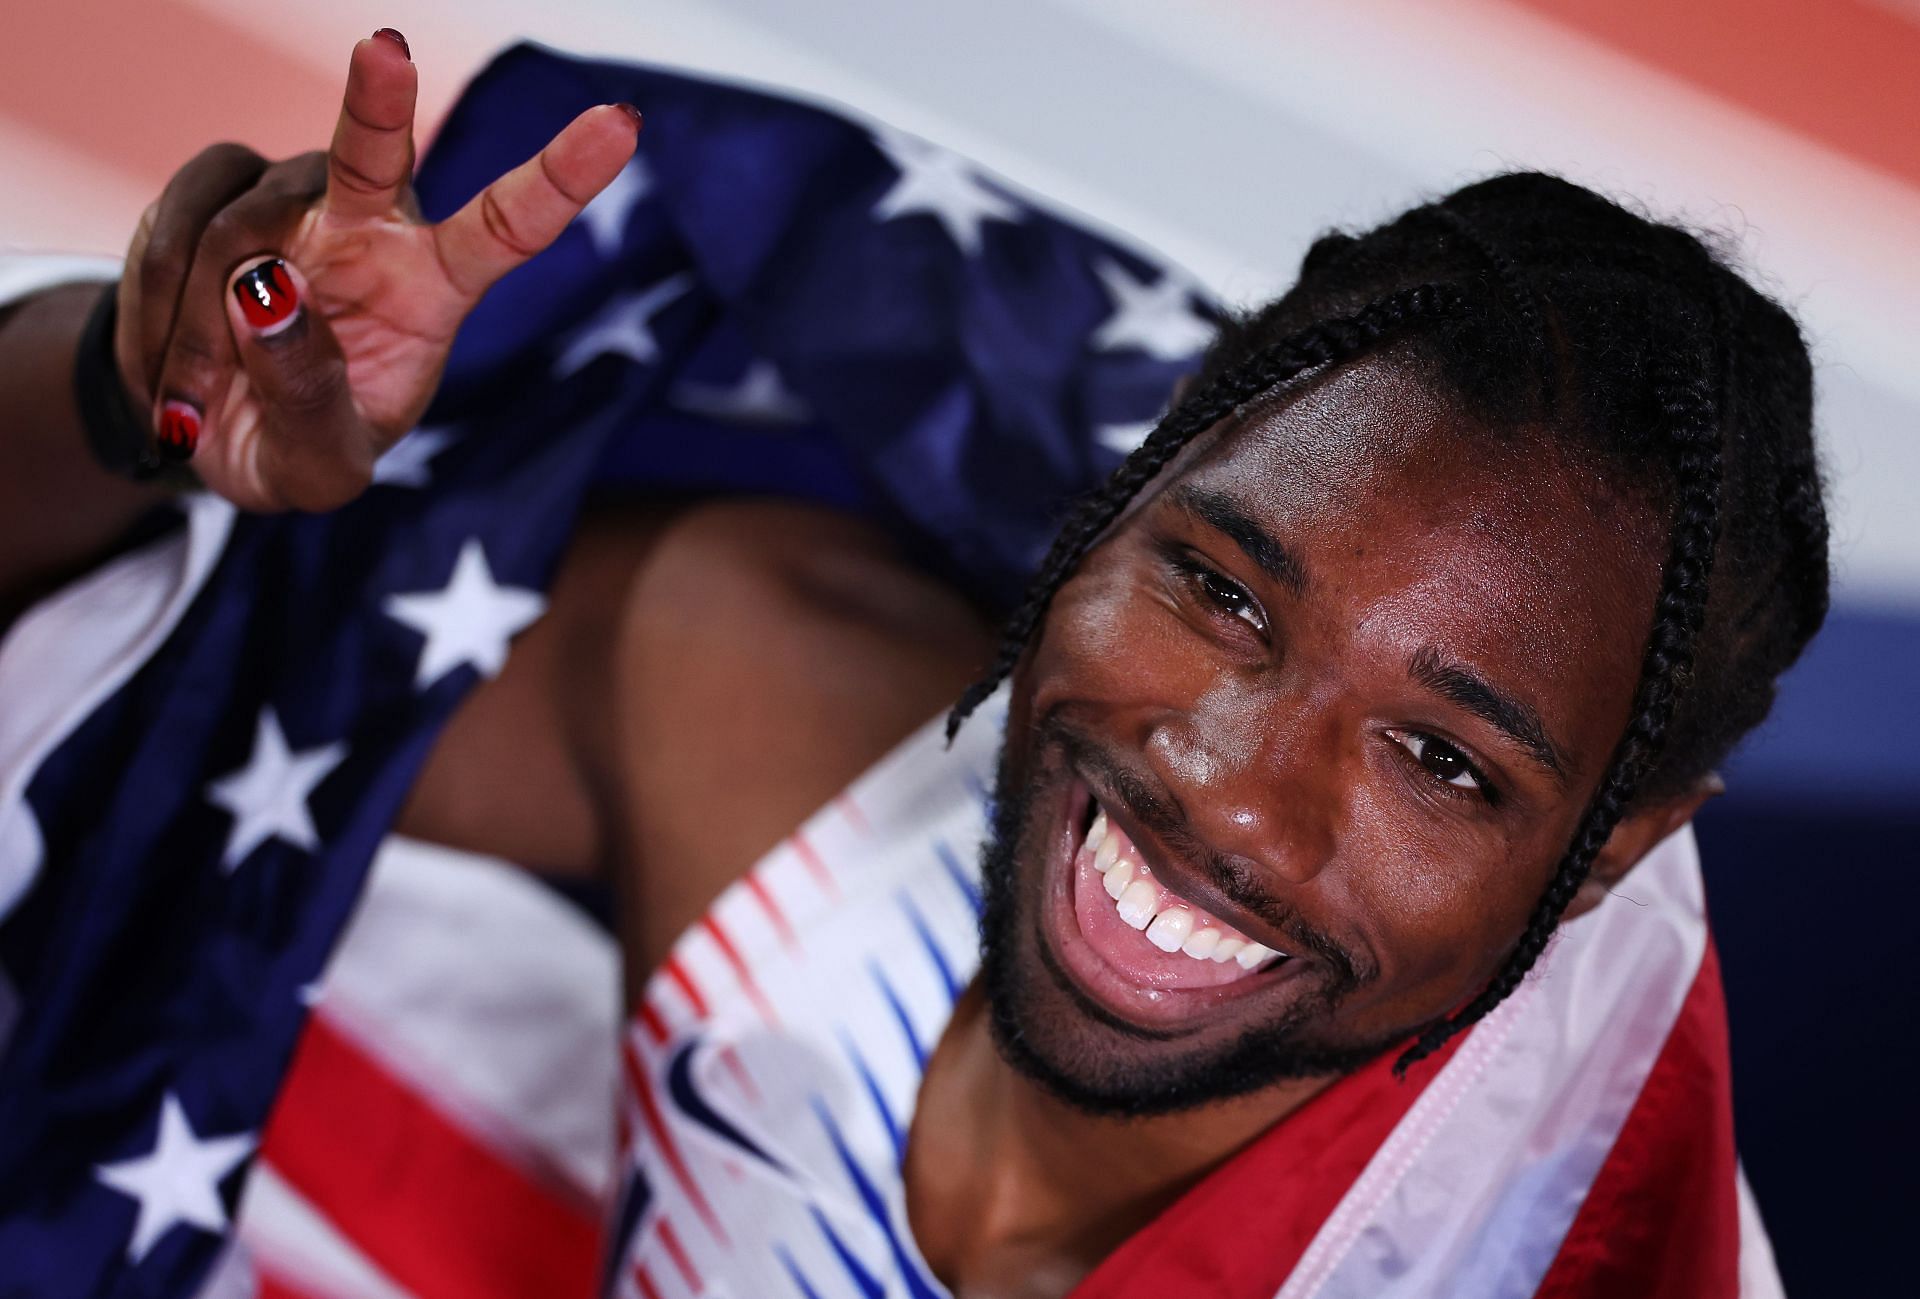 Noah Lyles poses for a photo after the Men&#039;s 4x400 Metres Relay Final at the World Athletics Indoor Championships in Glasgow, Scotland.